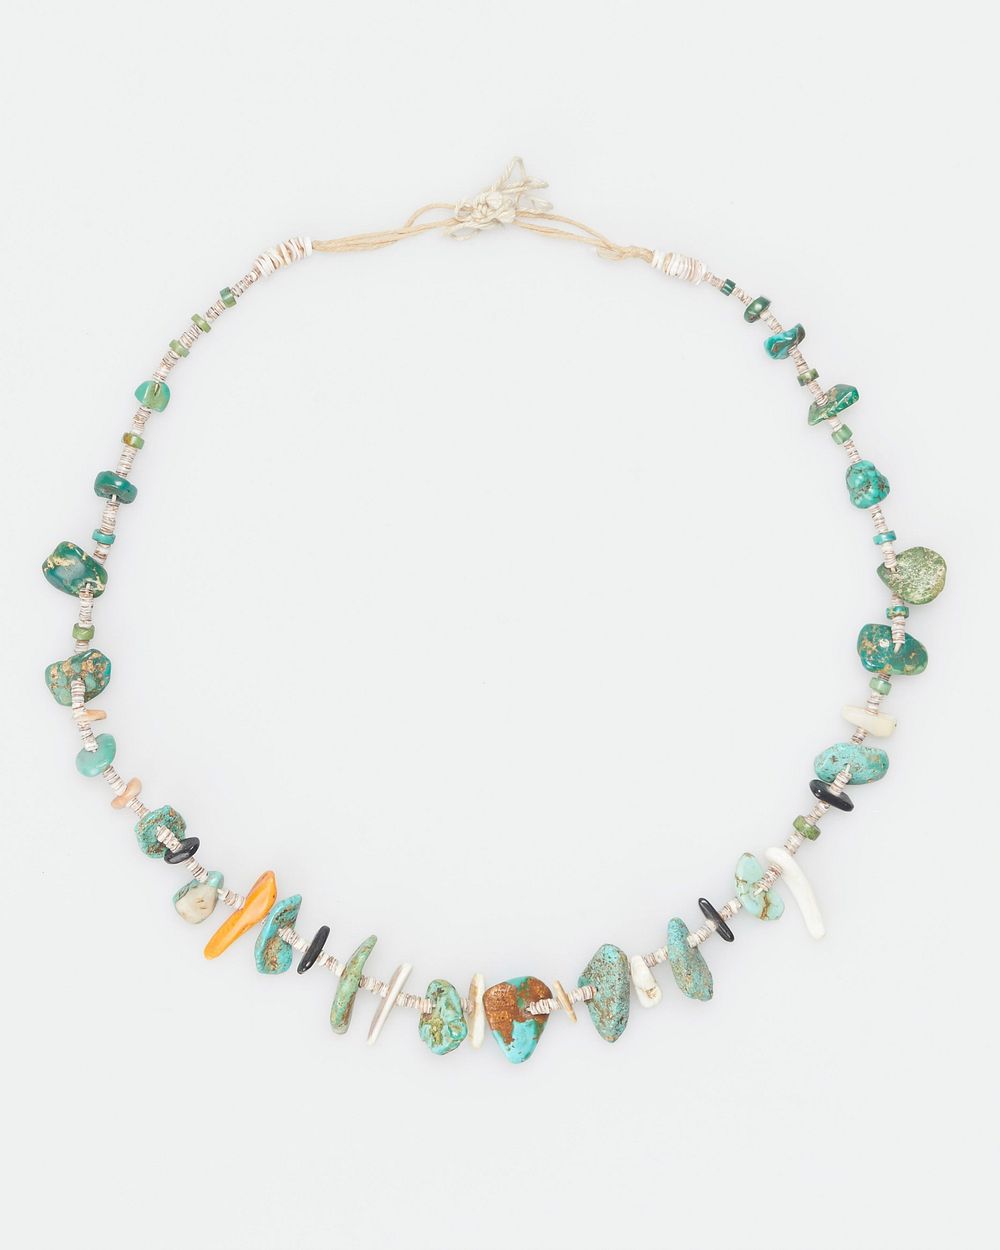 Single strand small shell beads, green turquoise nuggets, shell pieces. J.#677, Cat.# 881. Original from the Minneapolis…